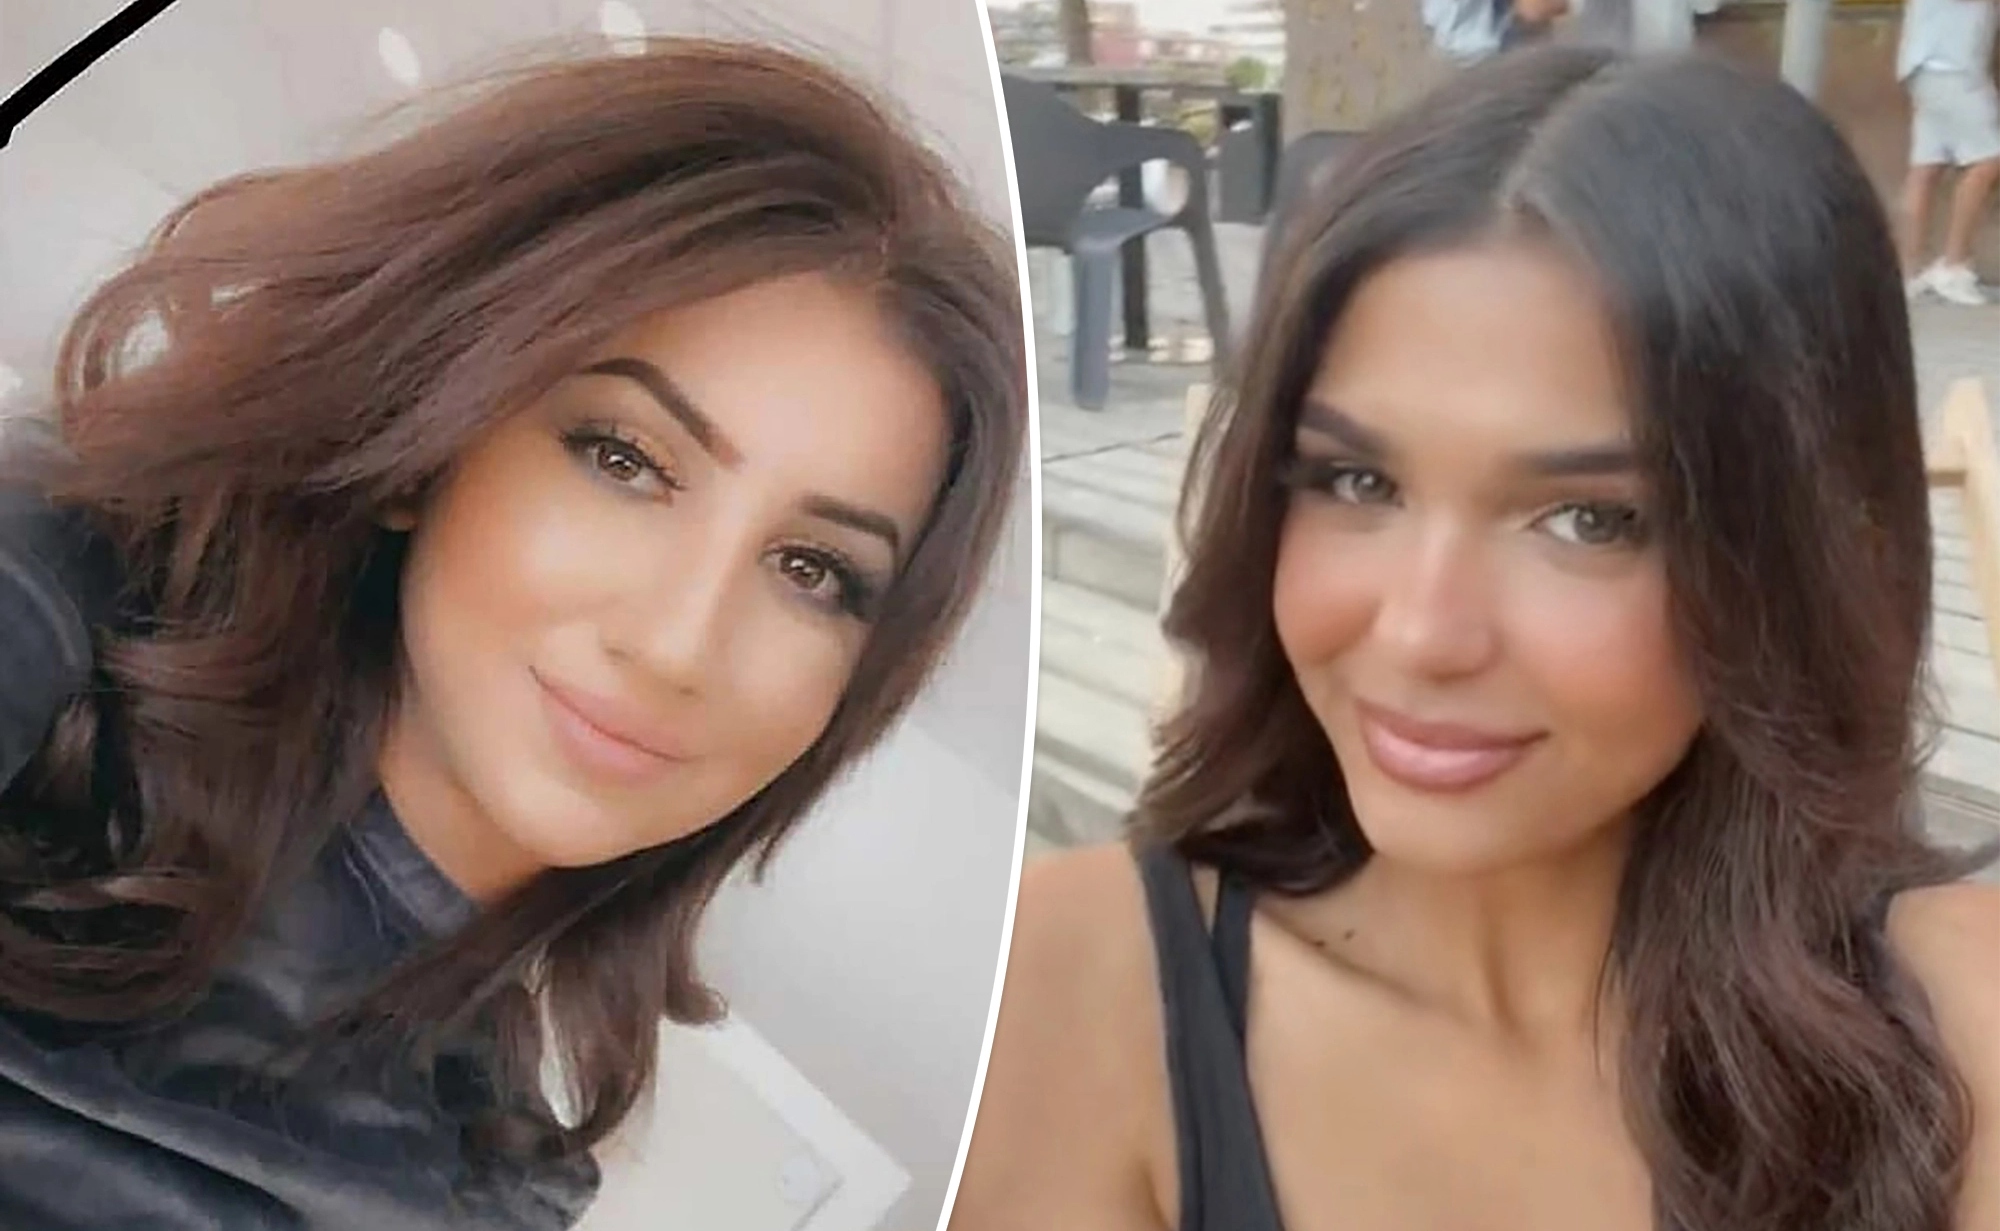 Woman Found Her Doppelgänger Online And Killed Her So She Could Fake Her Death